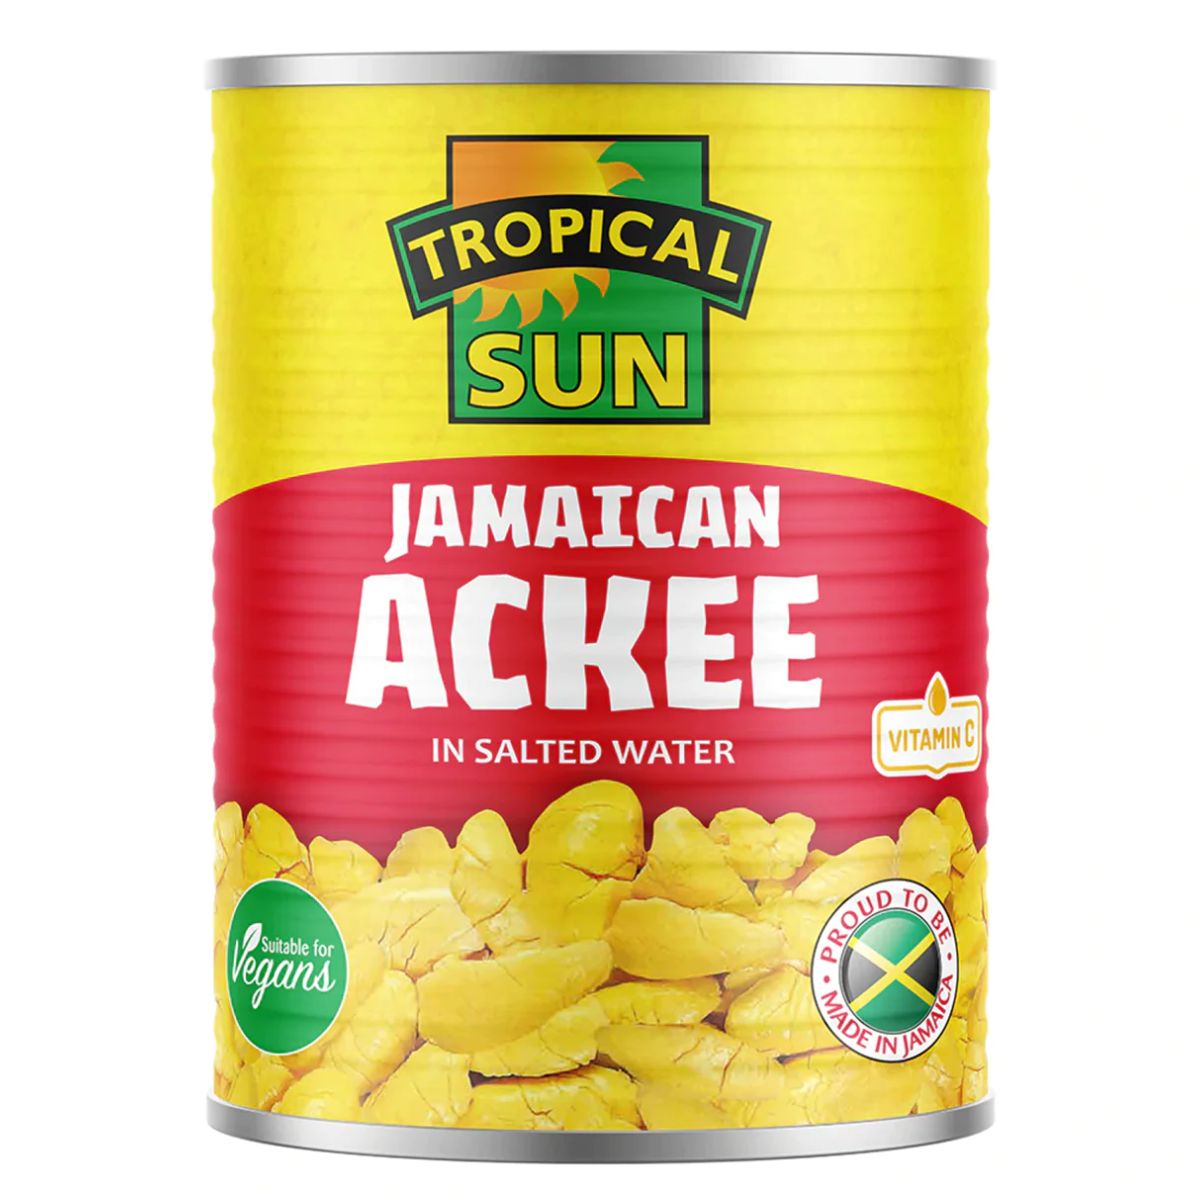 Can of Tropical Sun - Jamaican Ackee in Salted Water - 540g, vitamin c enriched, suitable for vegans.